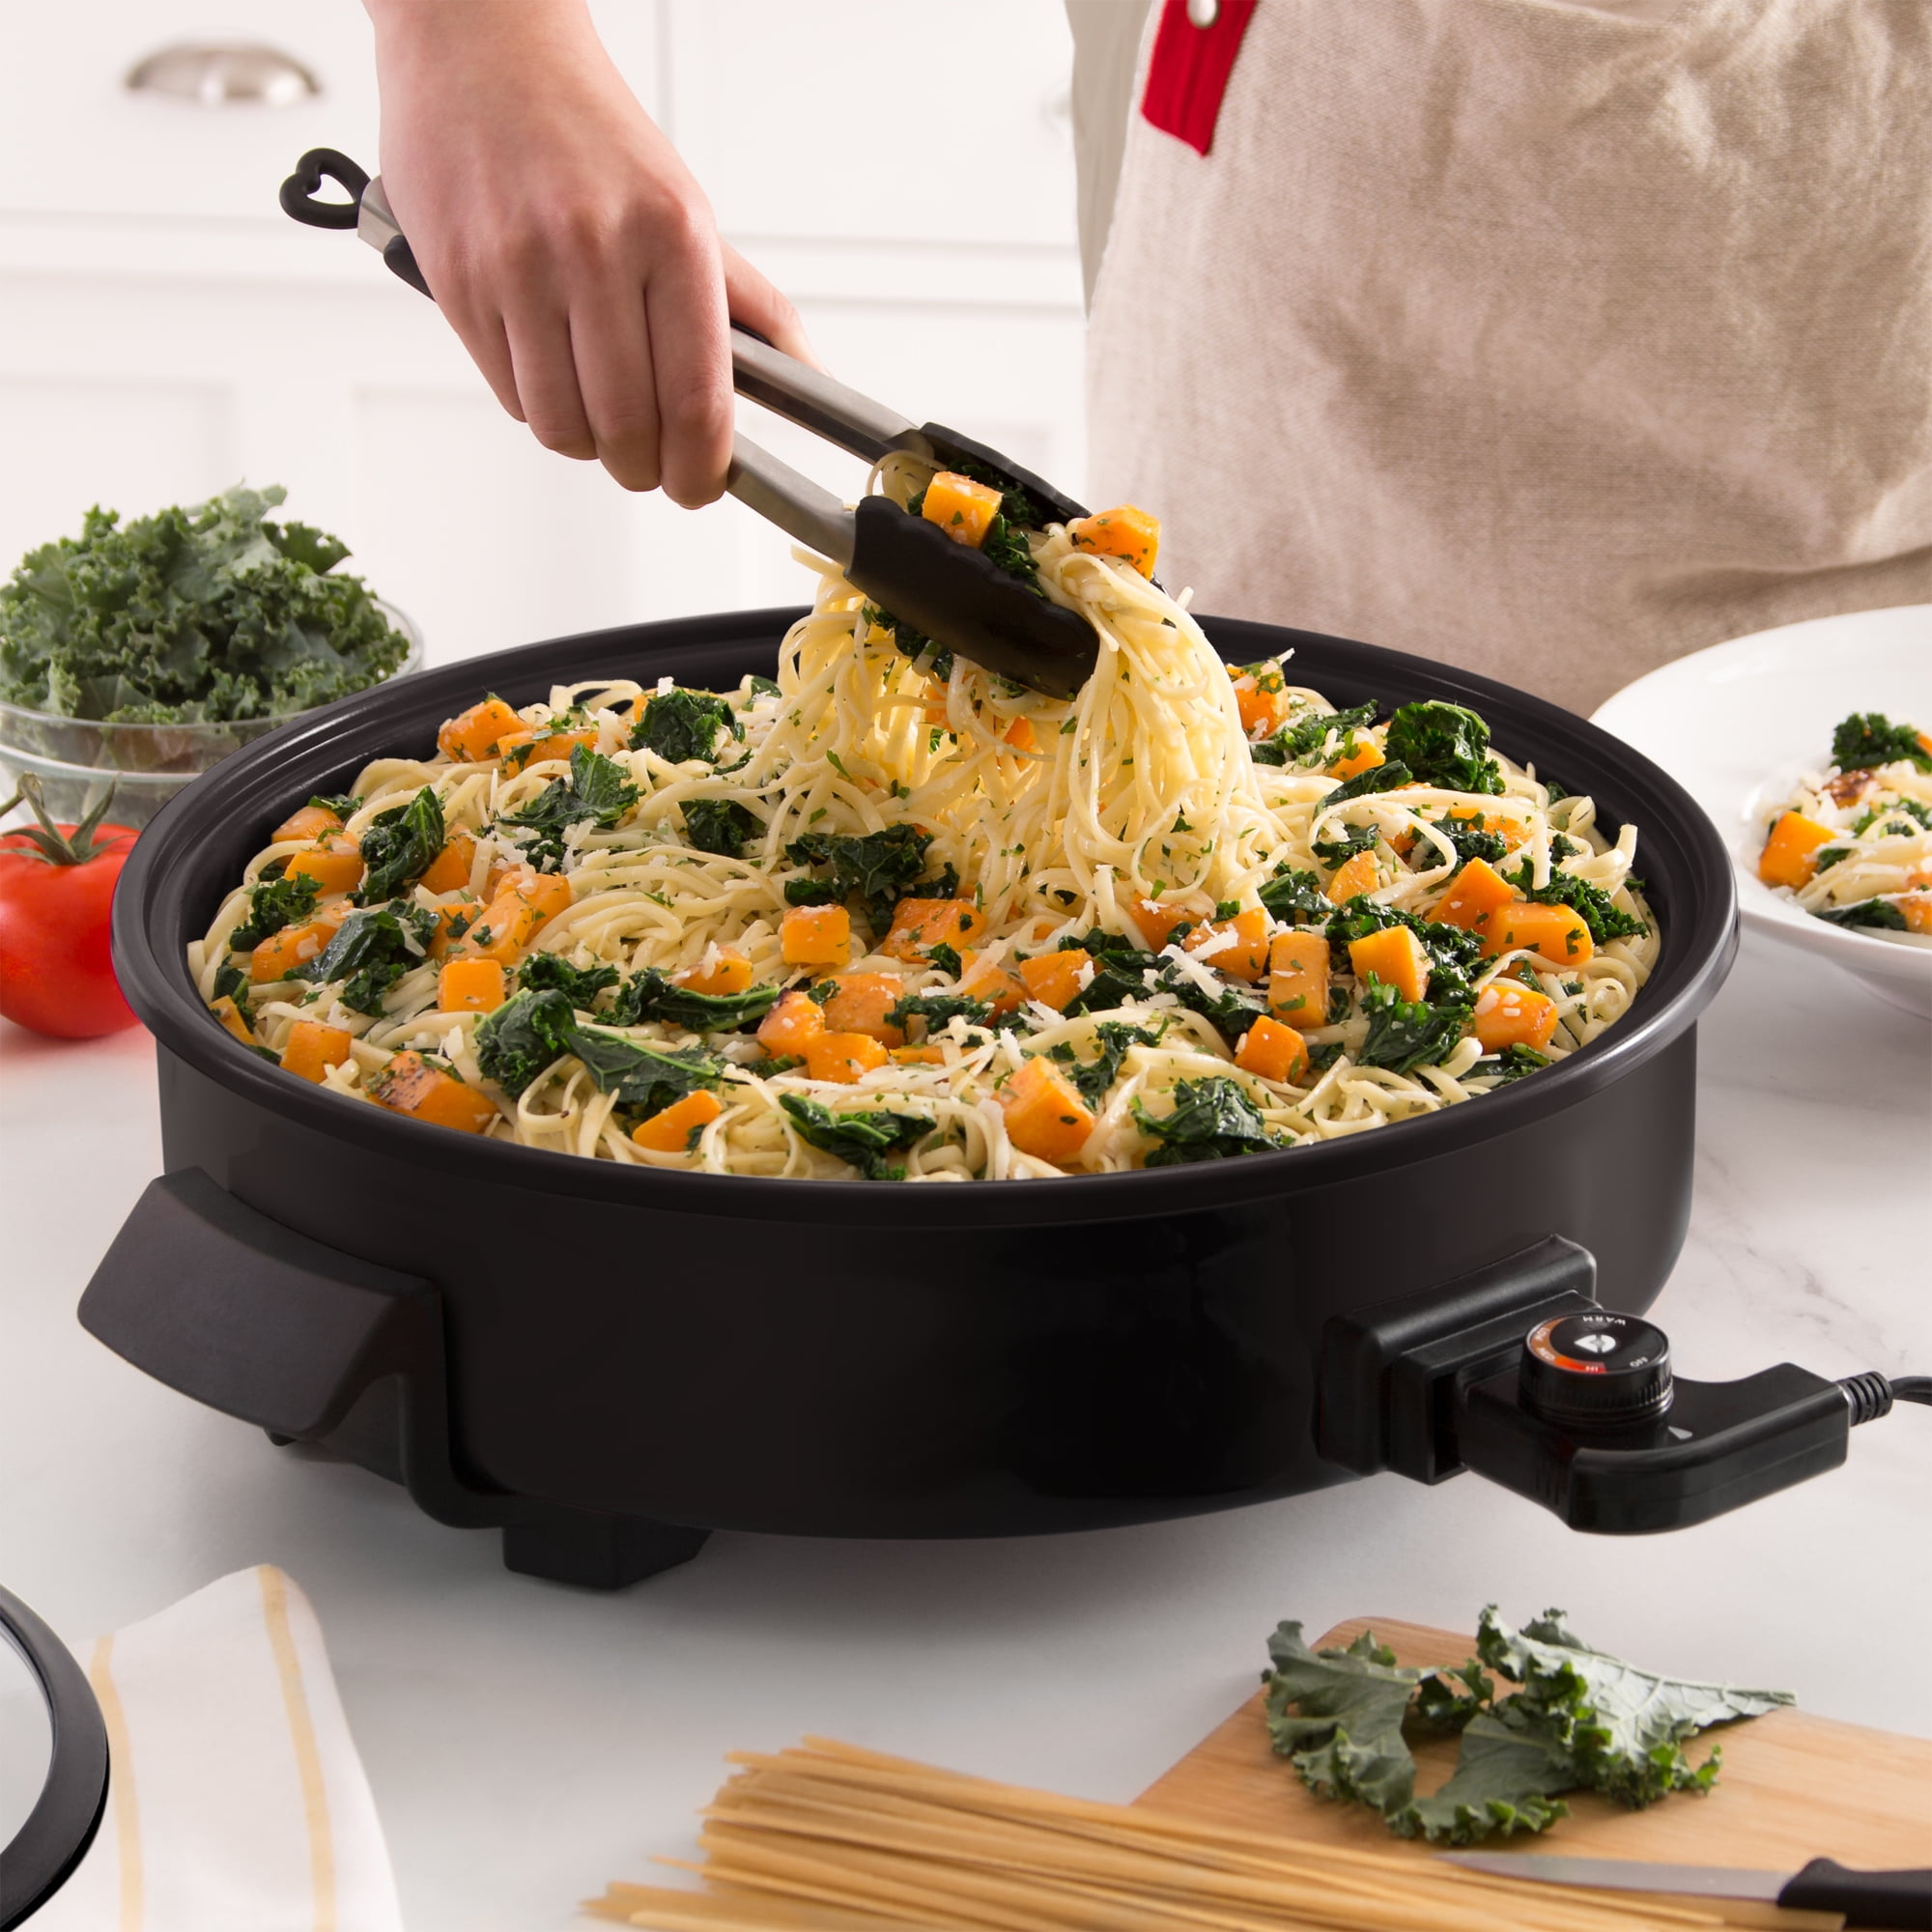 DASH Healthy Breakfast 14 Family Size Rapid Skillet & Reviews